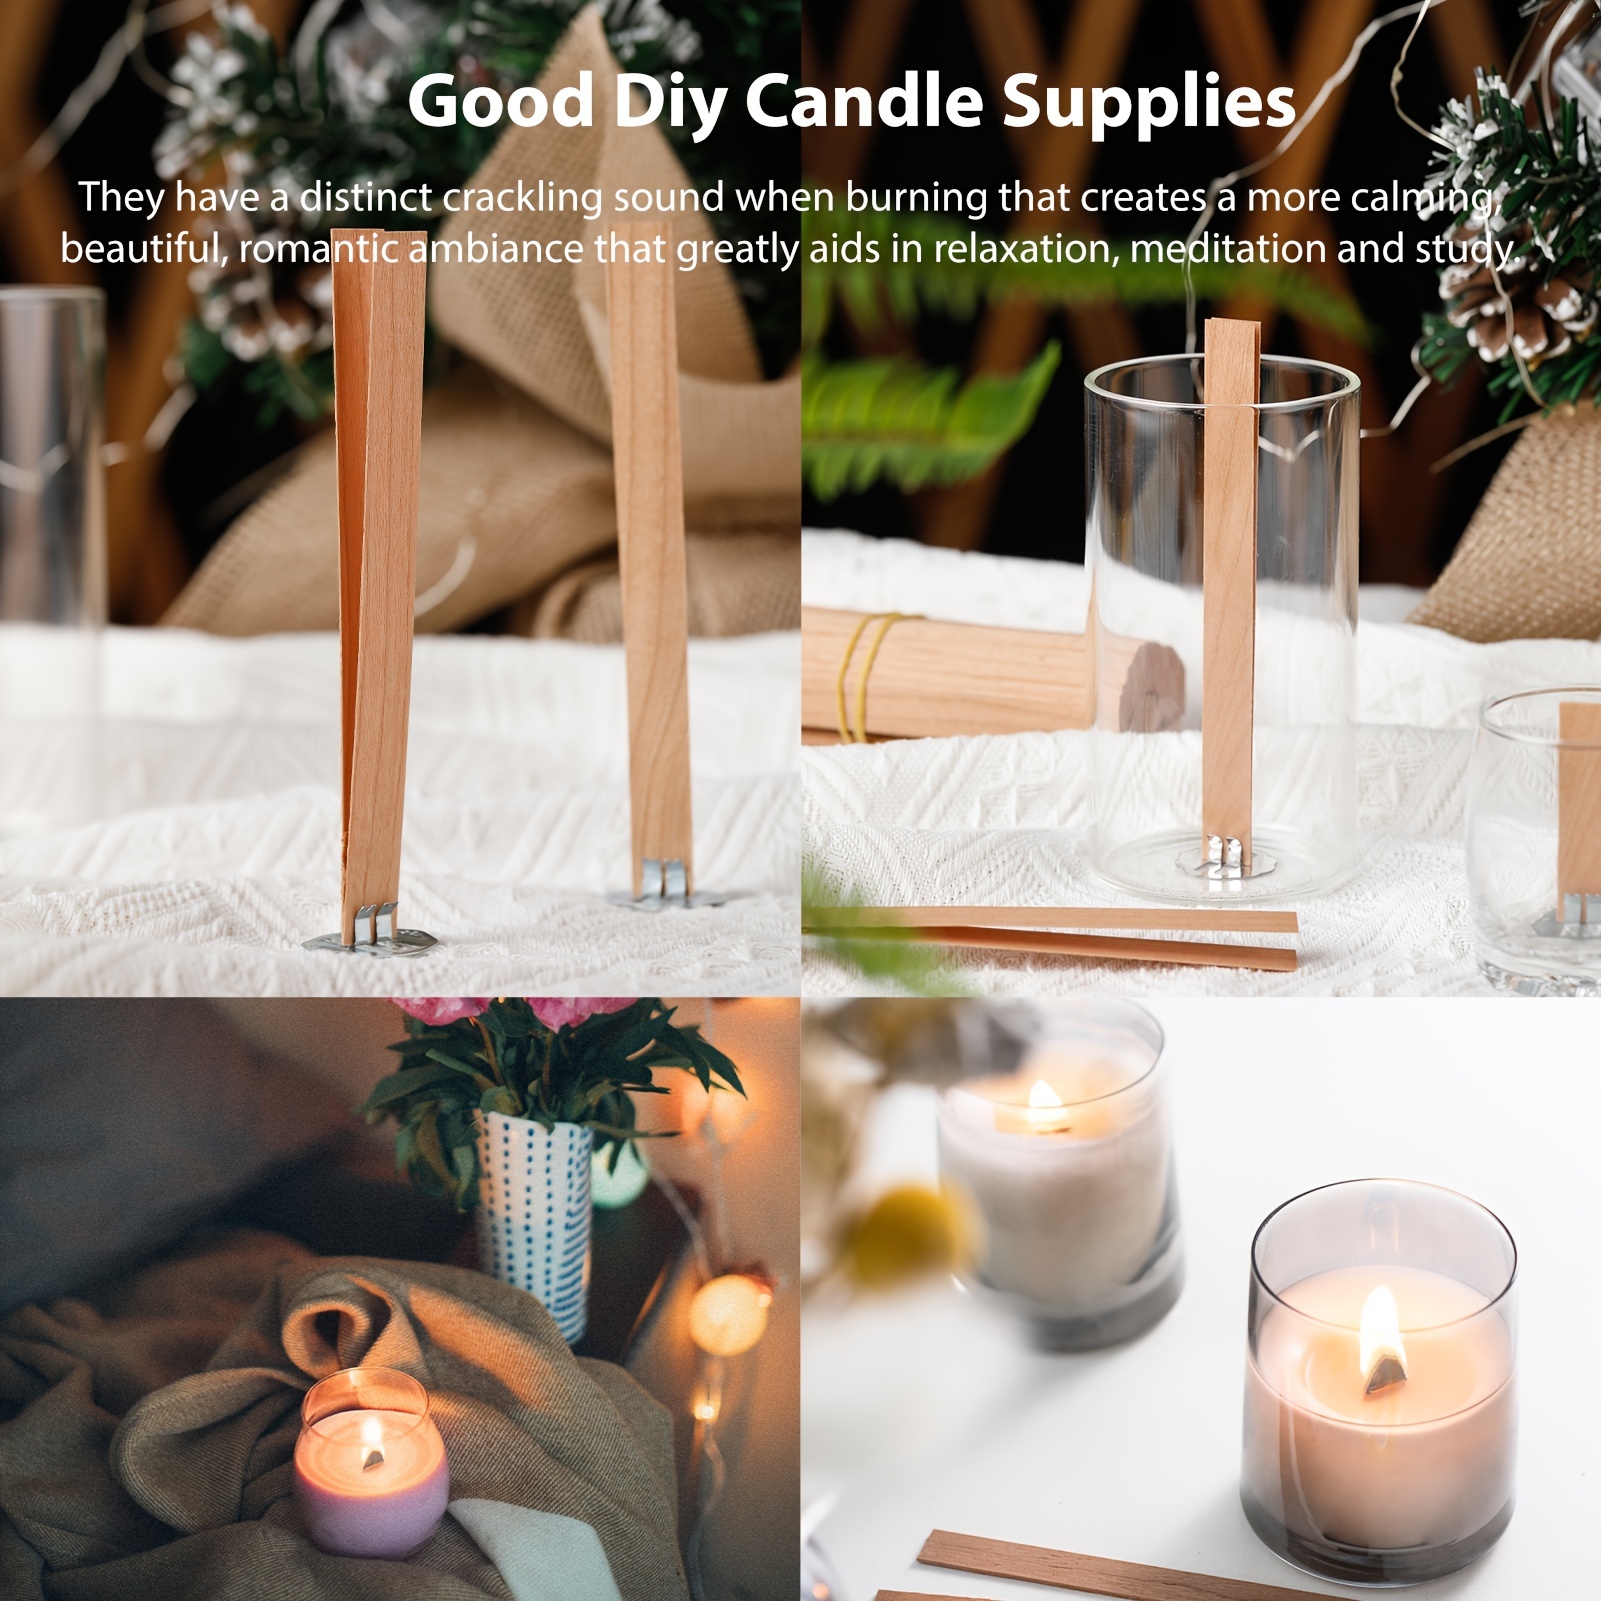 Cracking Single Natural Deck Cherry Wood Wooden Wick Wooden Custom Logo  Wicks Handmade Customized Packing Candle Making Making